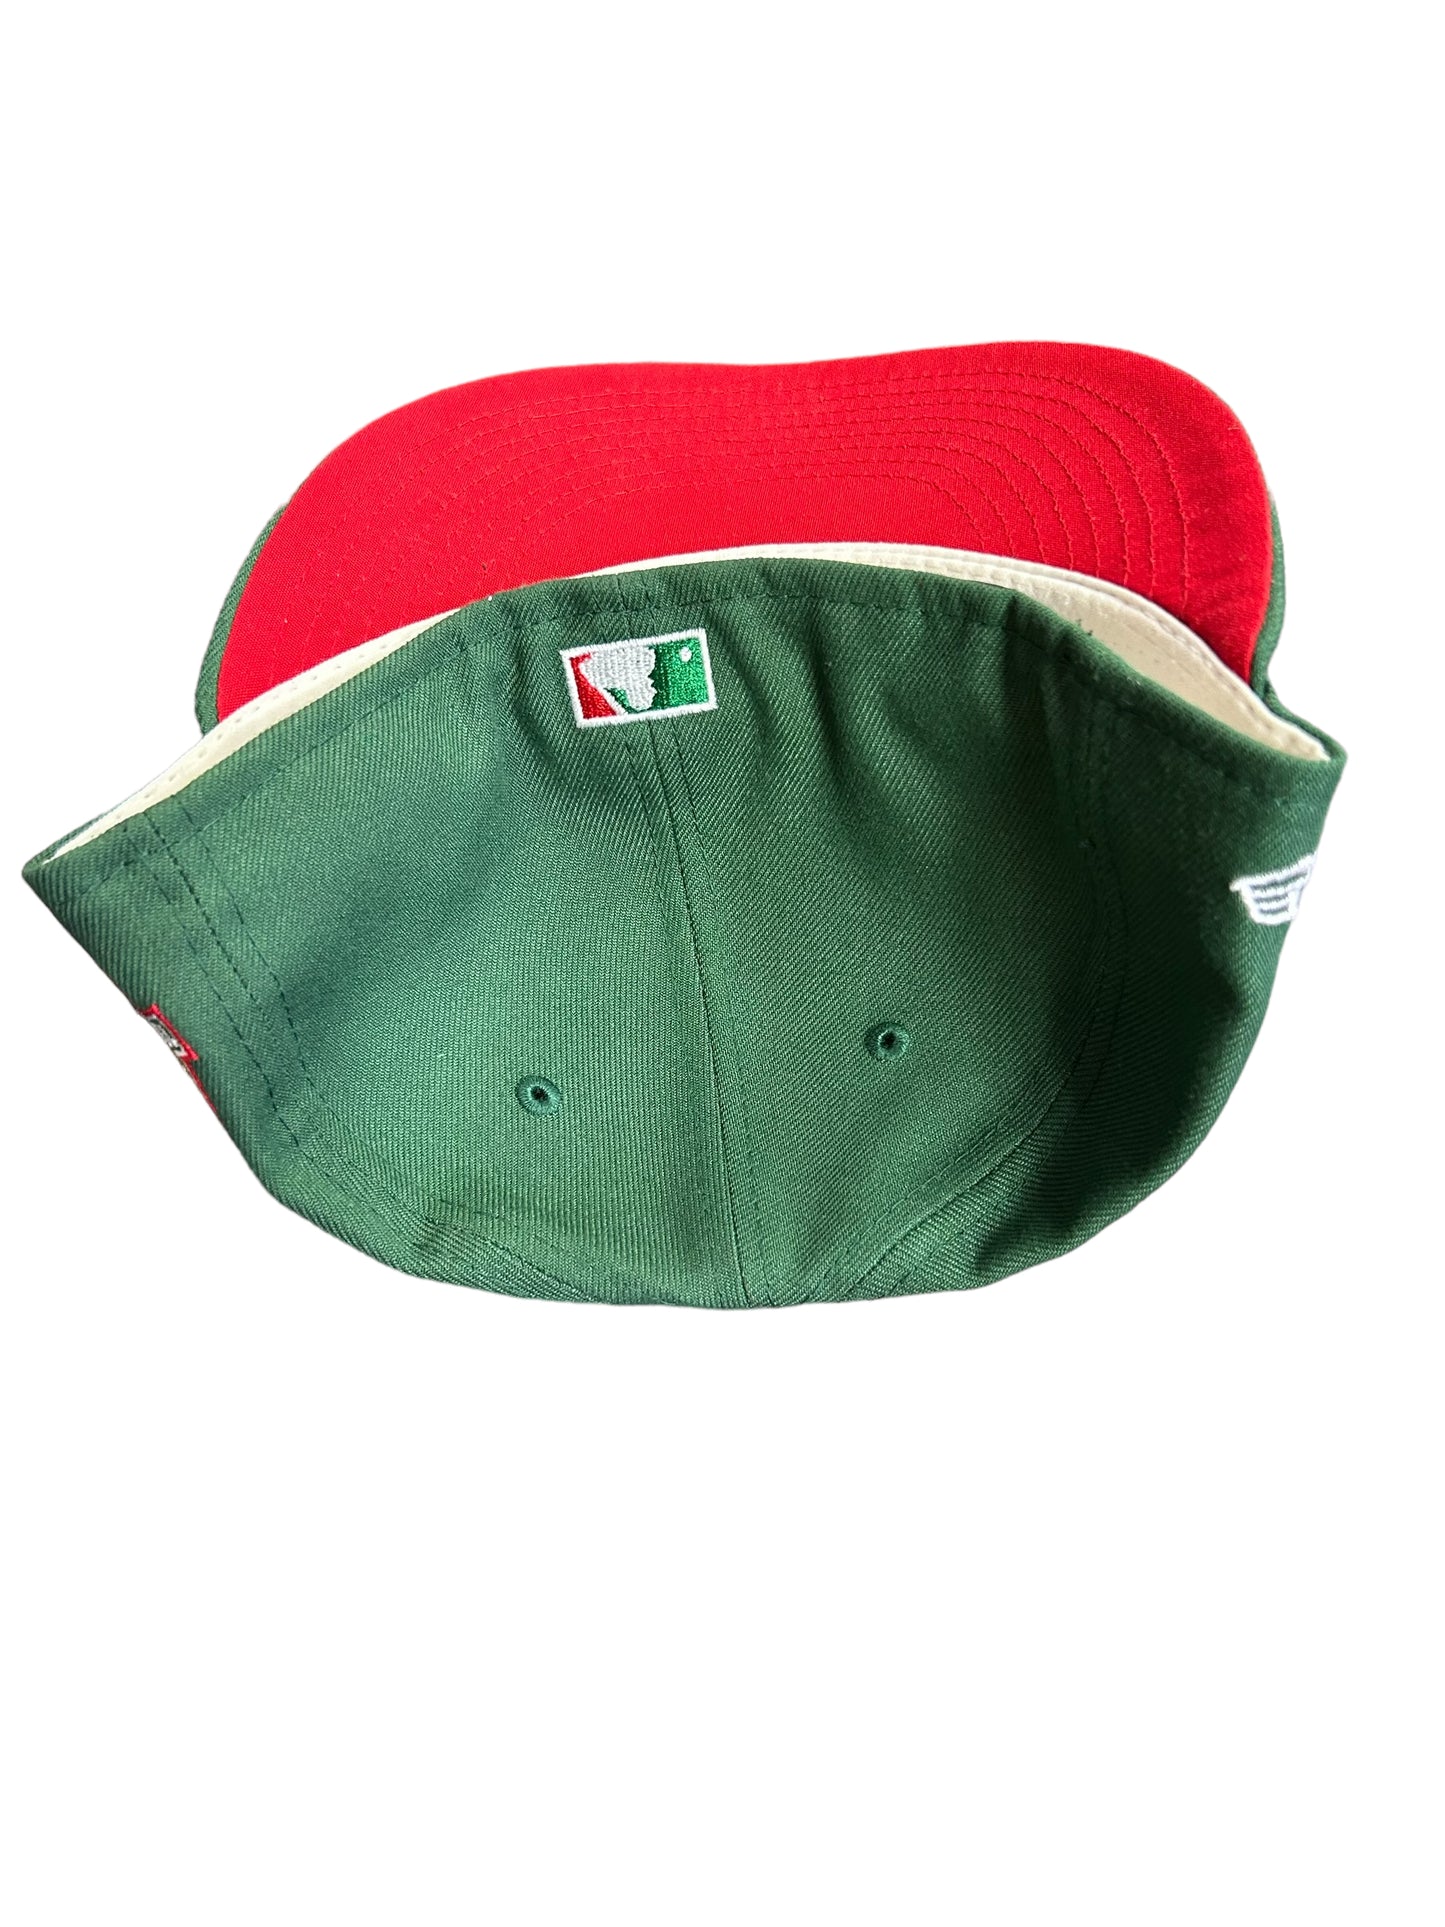 Houston Astros Green/Red Hat